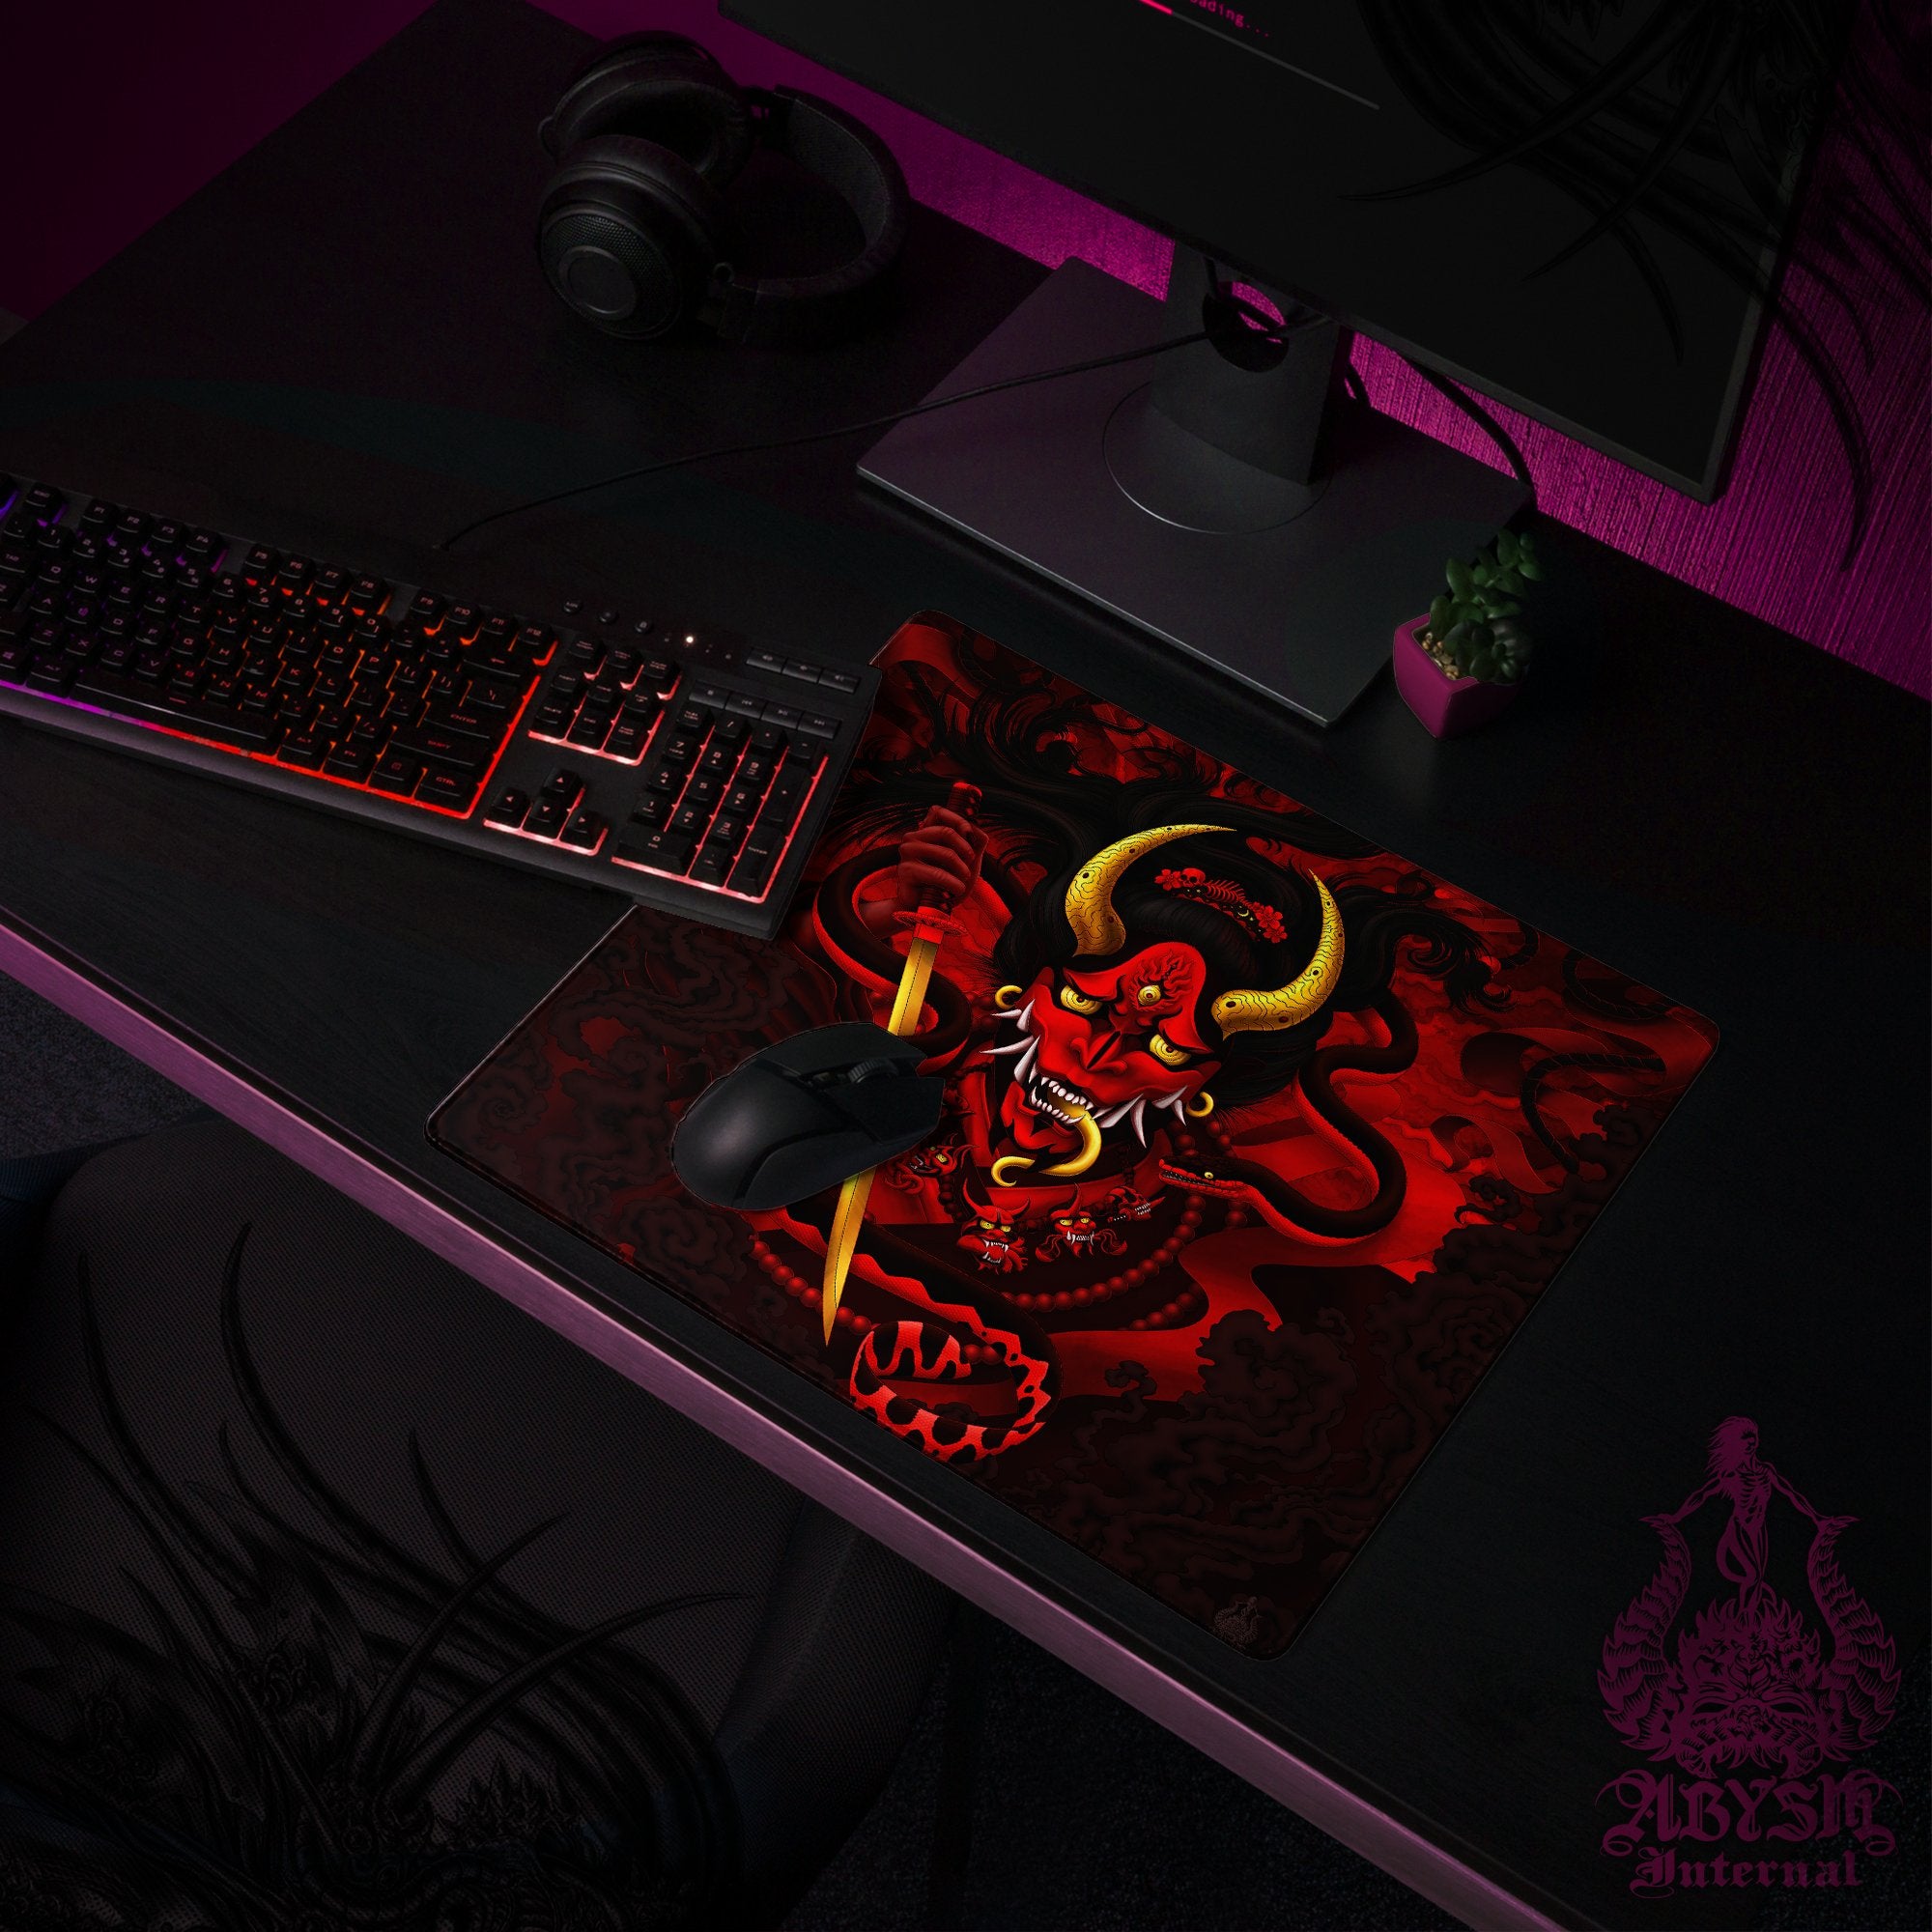 Japanese Demon Mouse Pad, Hannya Gaming Desk Mat, Youkai Workpad, Bloody Red Table Protector Cover, Fantasy Anime and Manga Art Print - Black Snake - Abysm Internal